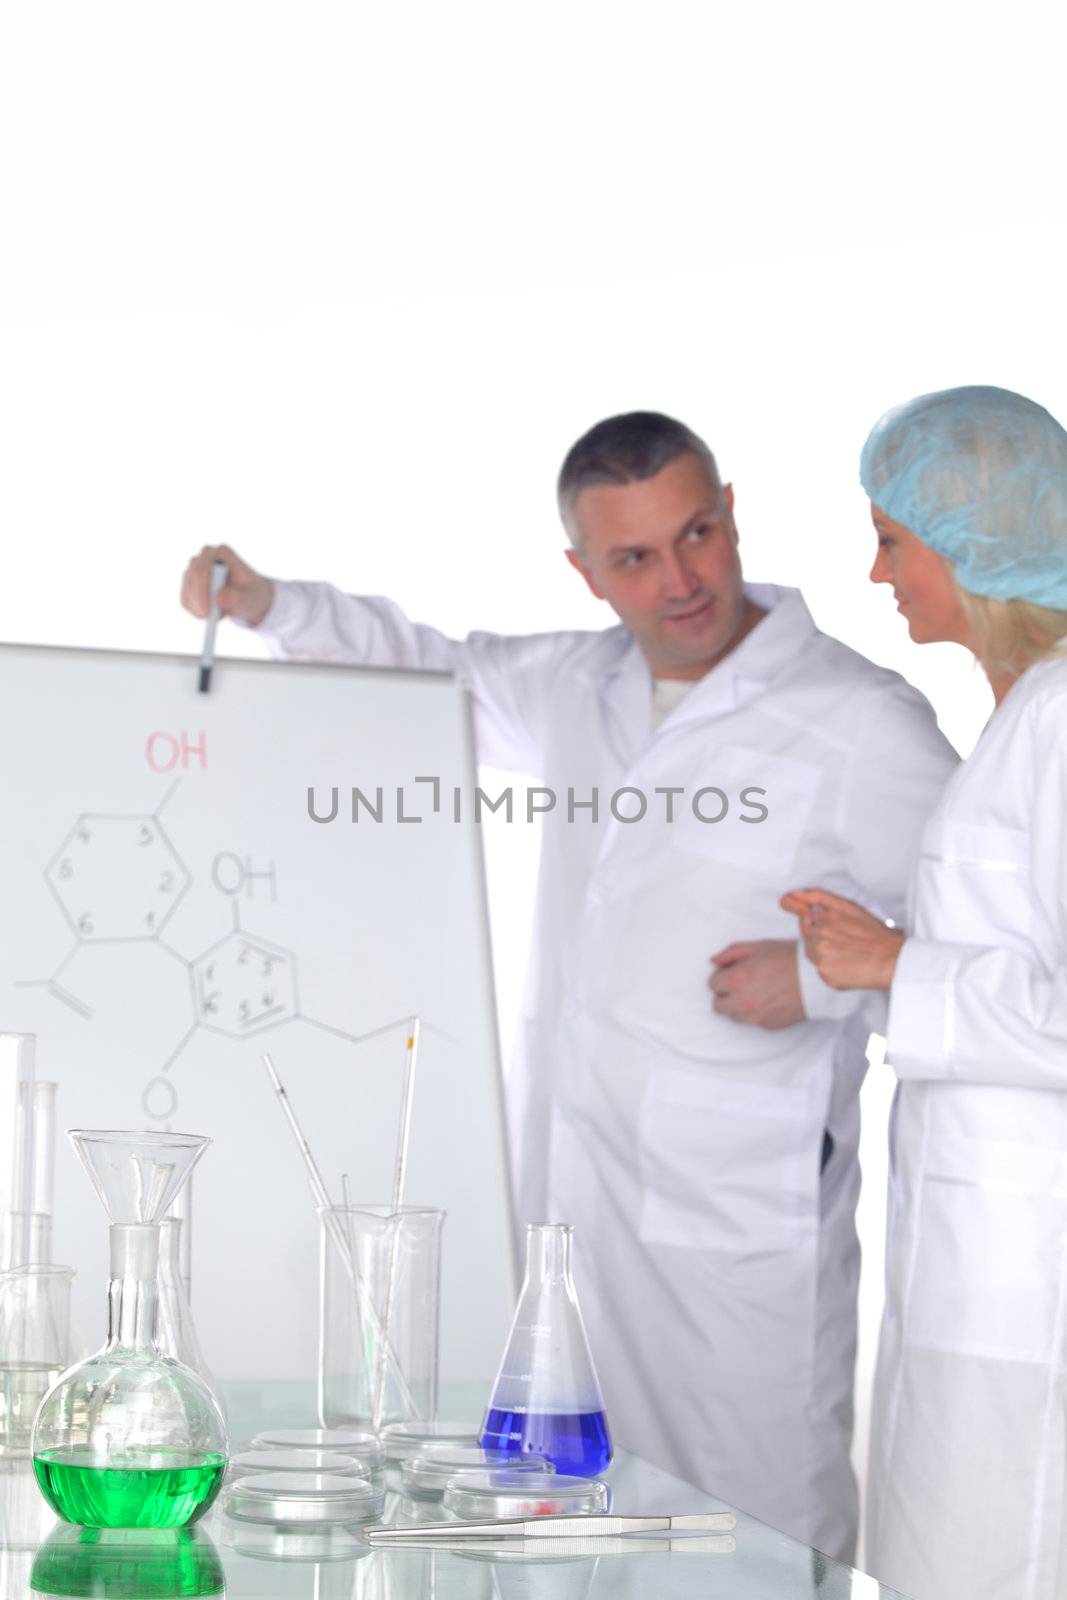  researchers holding a secret green chemical substance